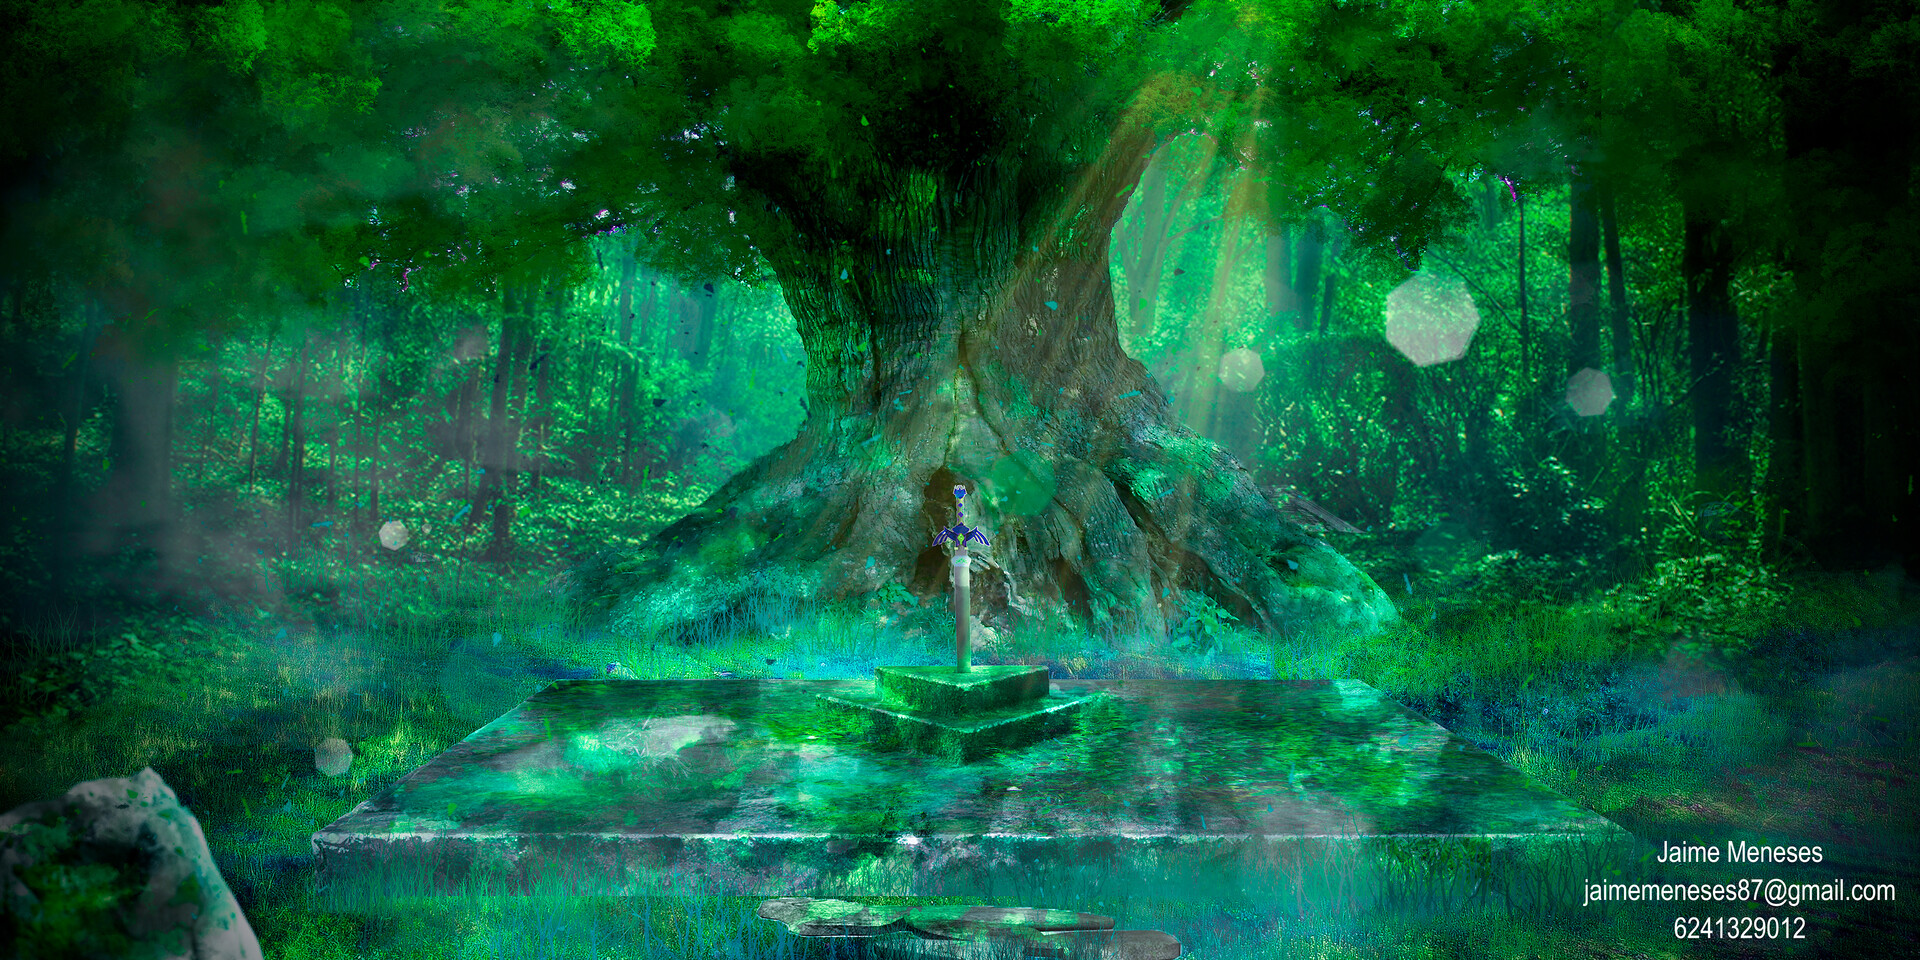 Ocarina of Time Lost Woods Artwork